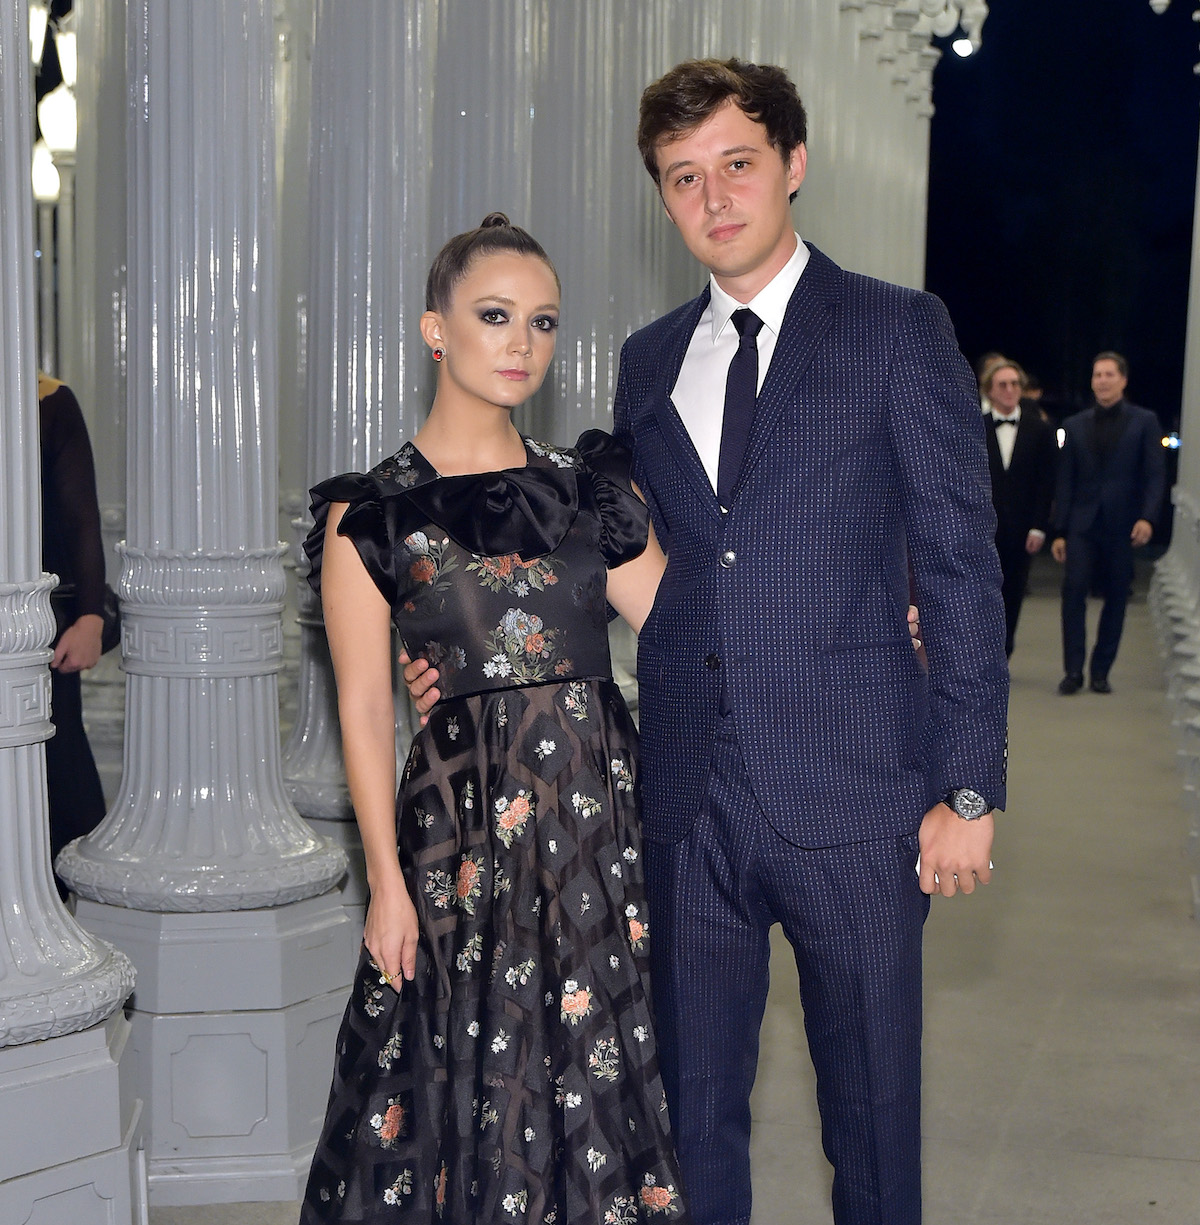 Billie Lourd Is Engaged: Here’s How She Met and Fell in Love With Her Fiancé, Austen Rydell